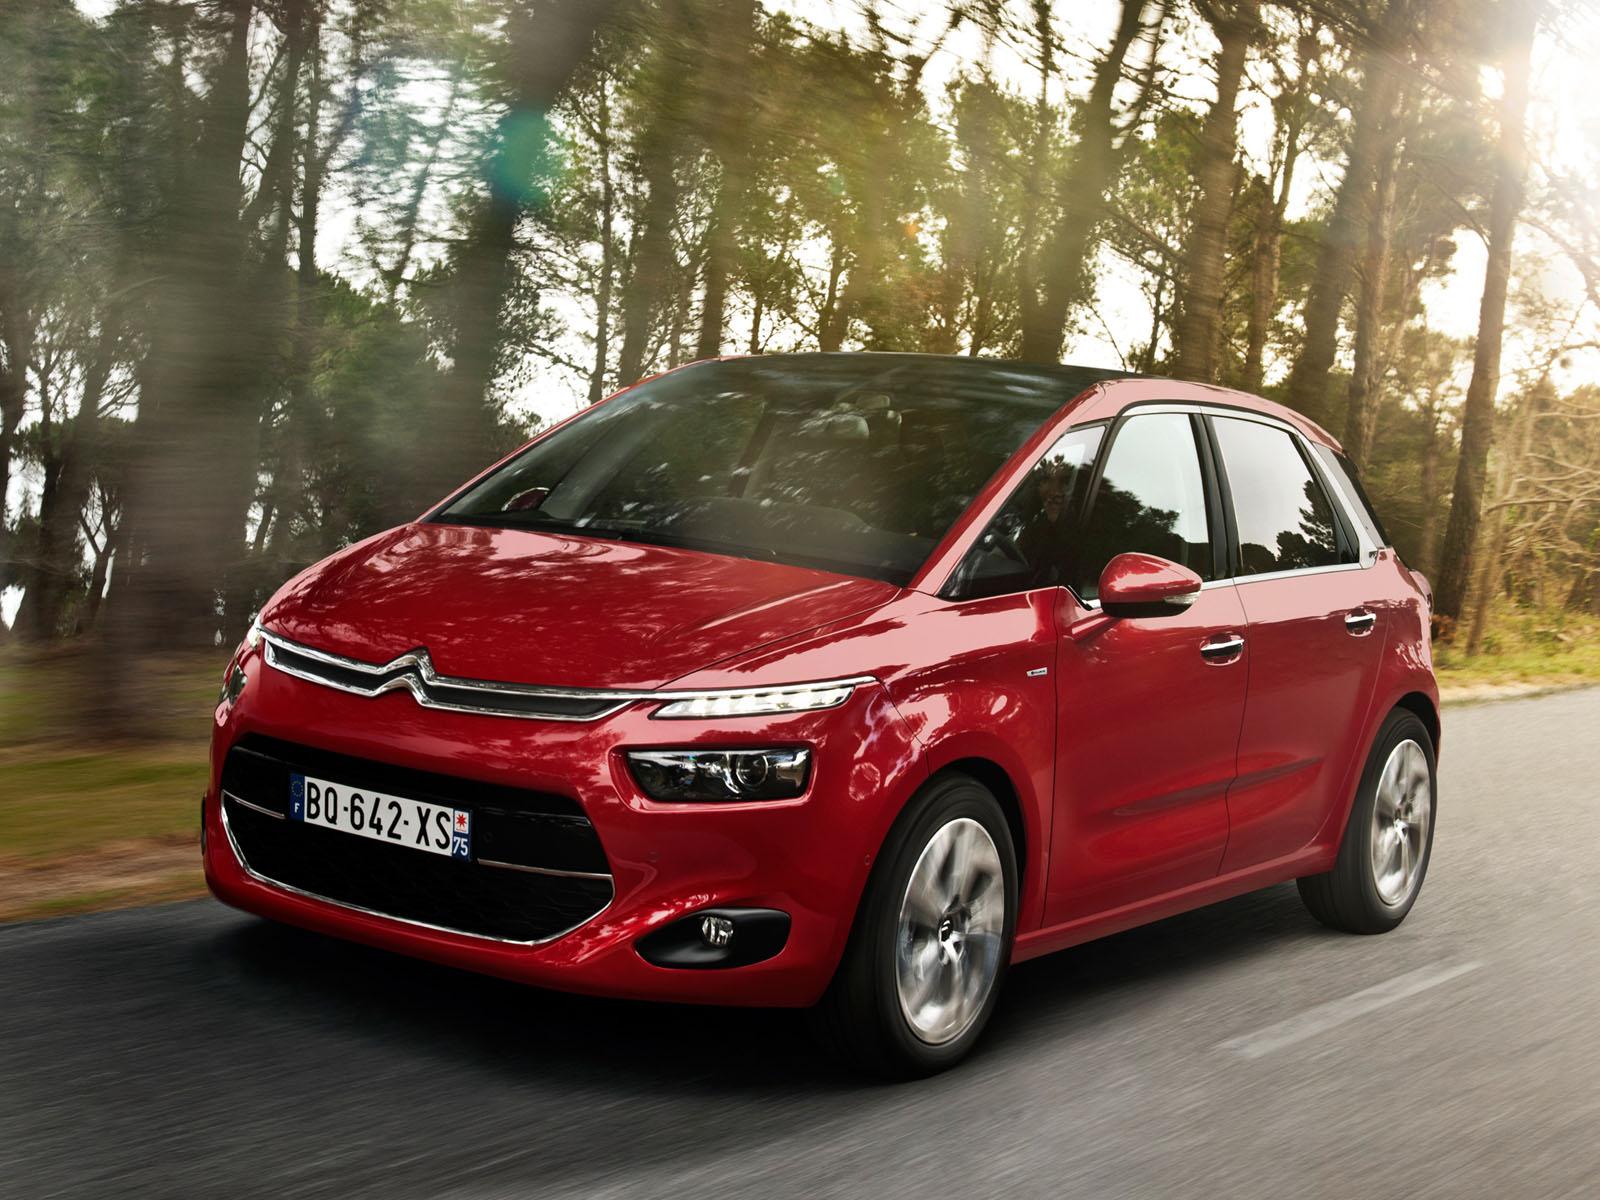 2013 Citroen C4 Picasso First Official Photos Leaked